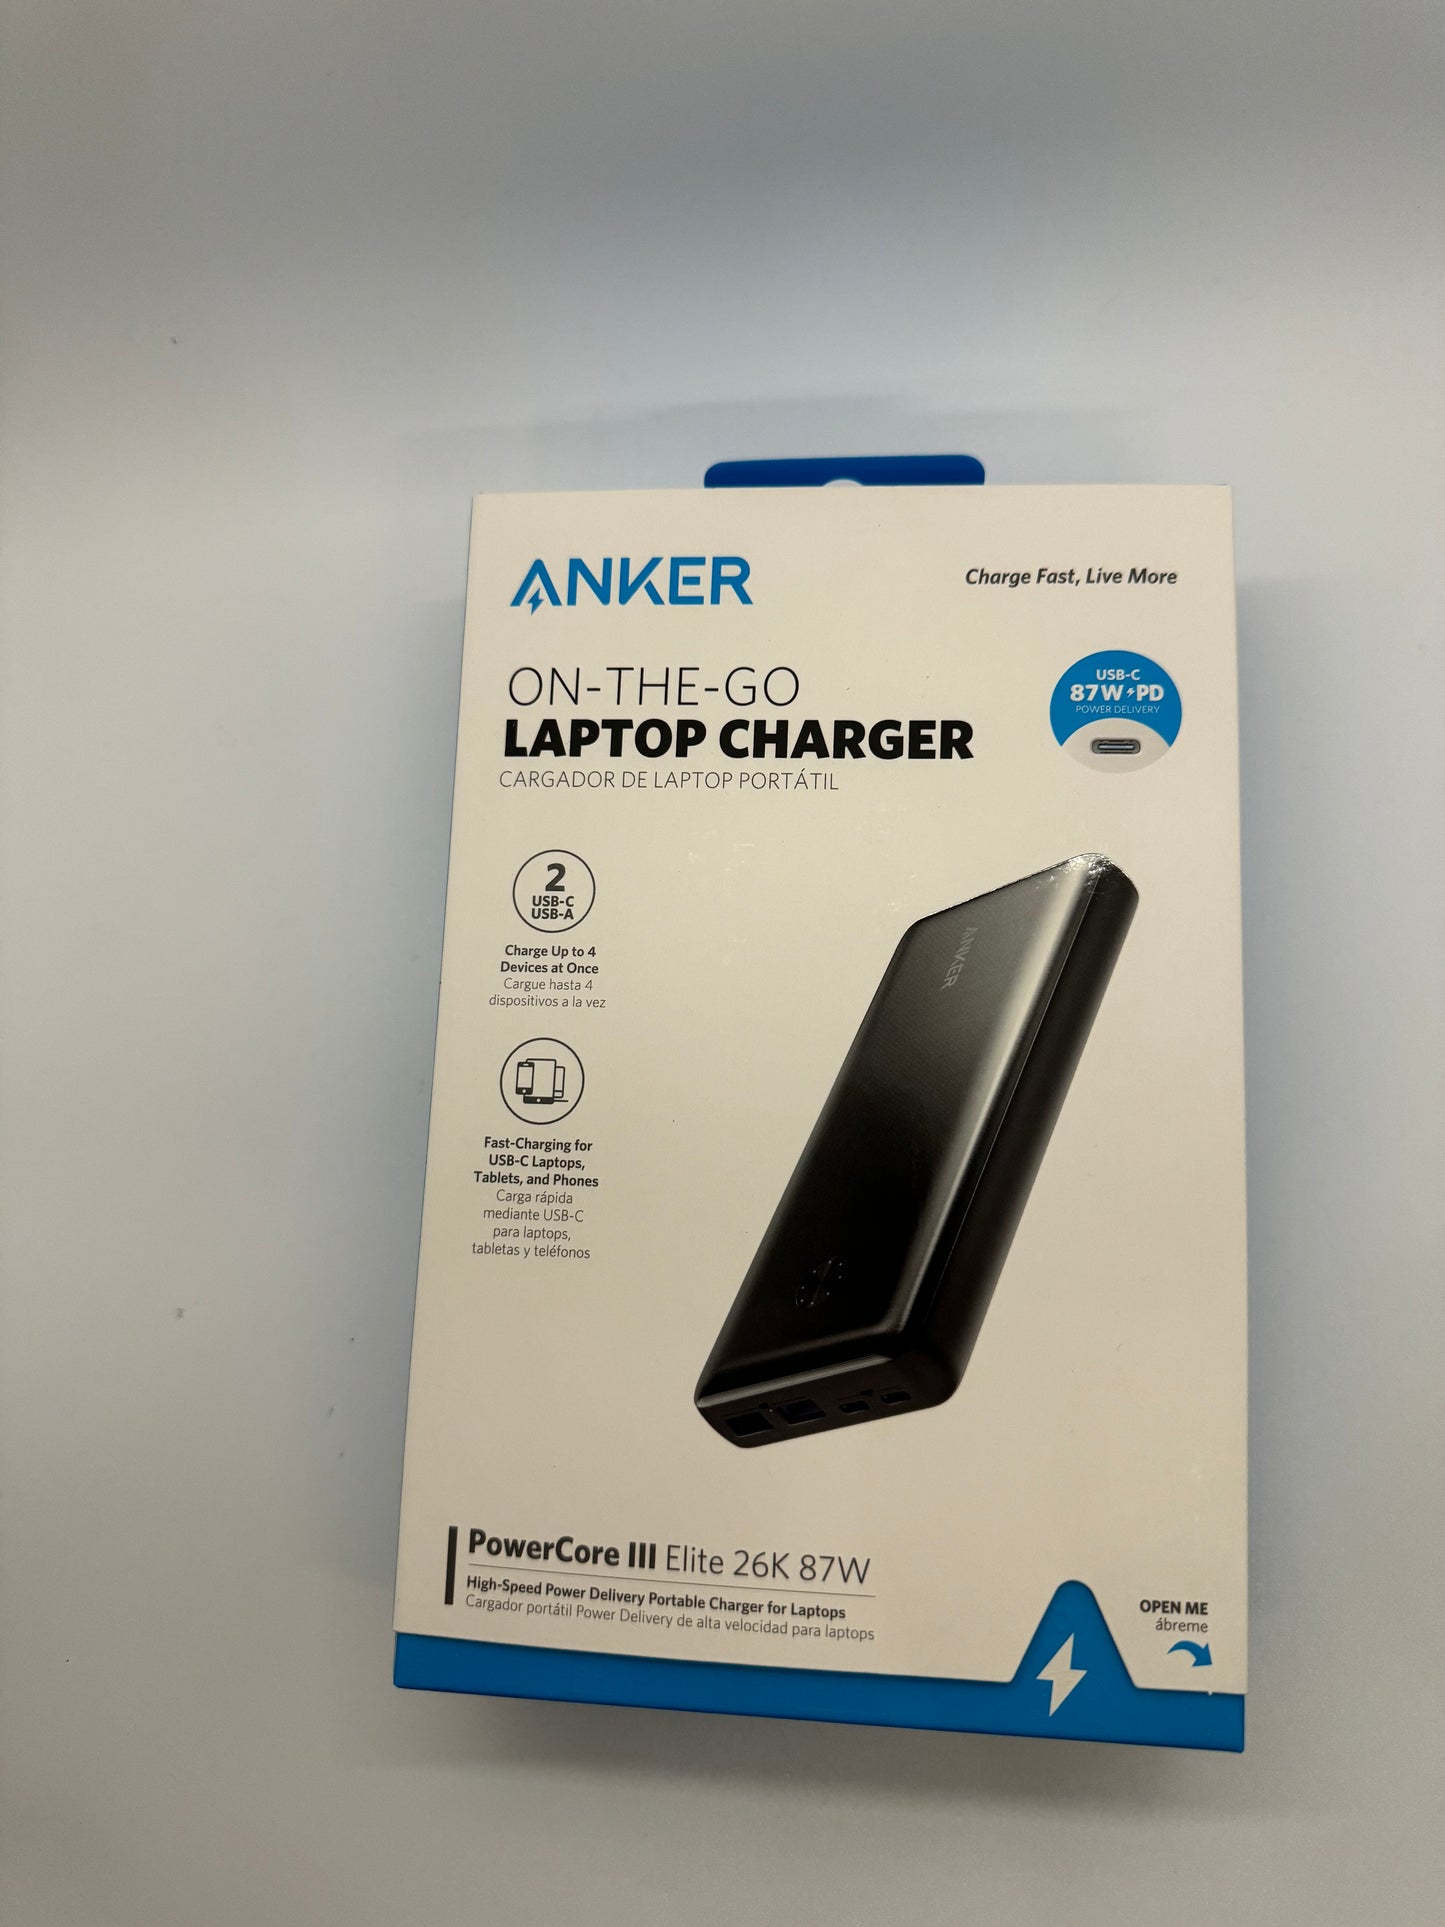 Anker Power Core III 26,000mAh portable power supply with 2 high speed USB type C ports and 2 USB-A ports. Output of 87 watts with power to charge 4 devices at once including your laptop computer and all other devices